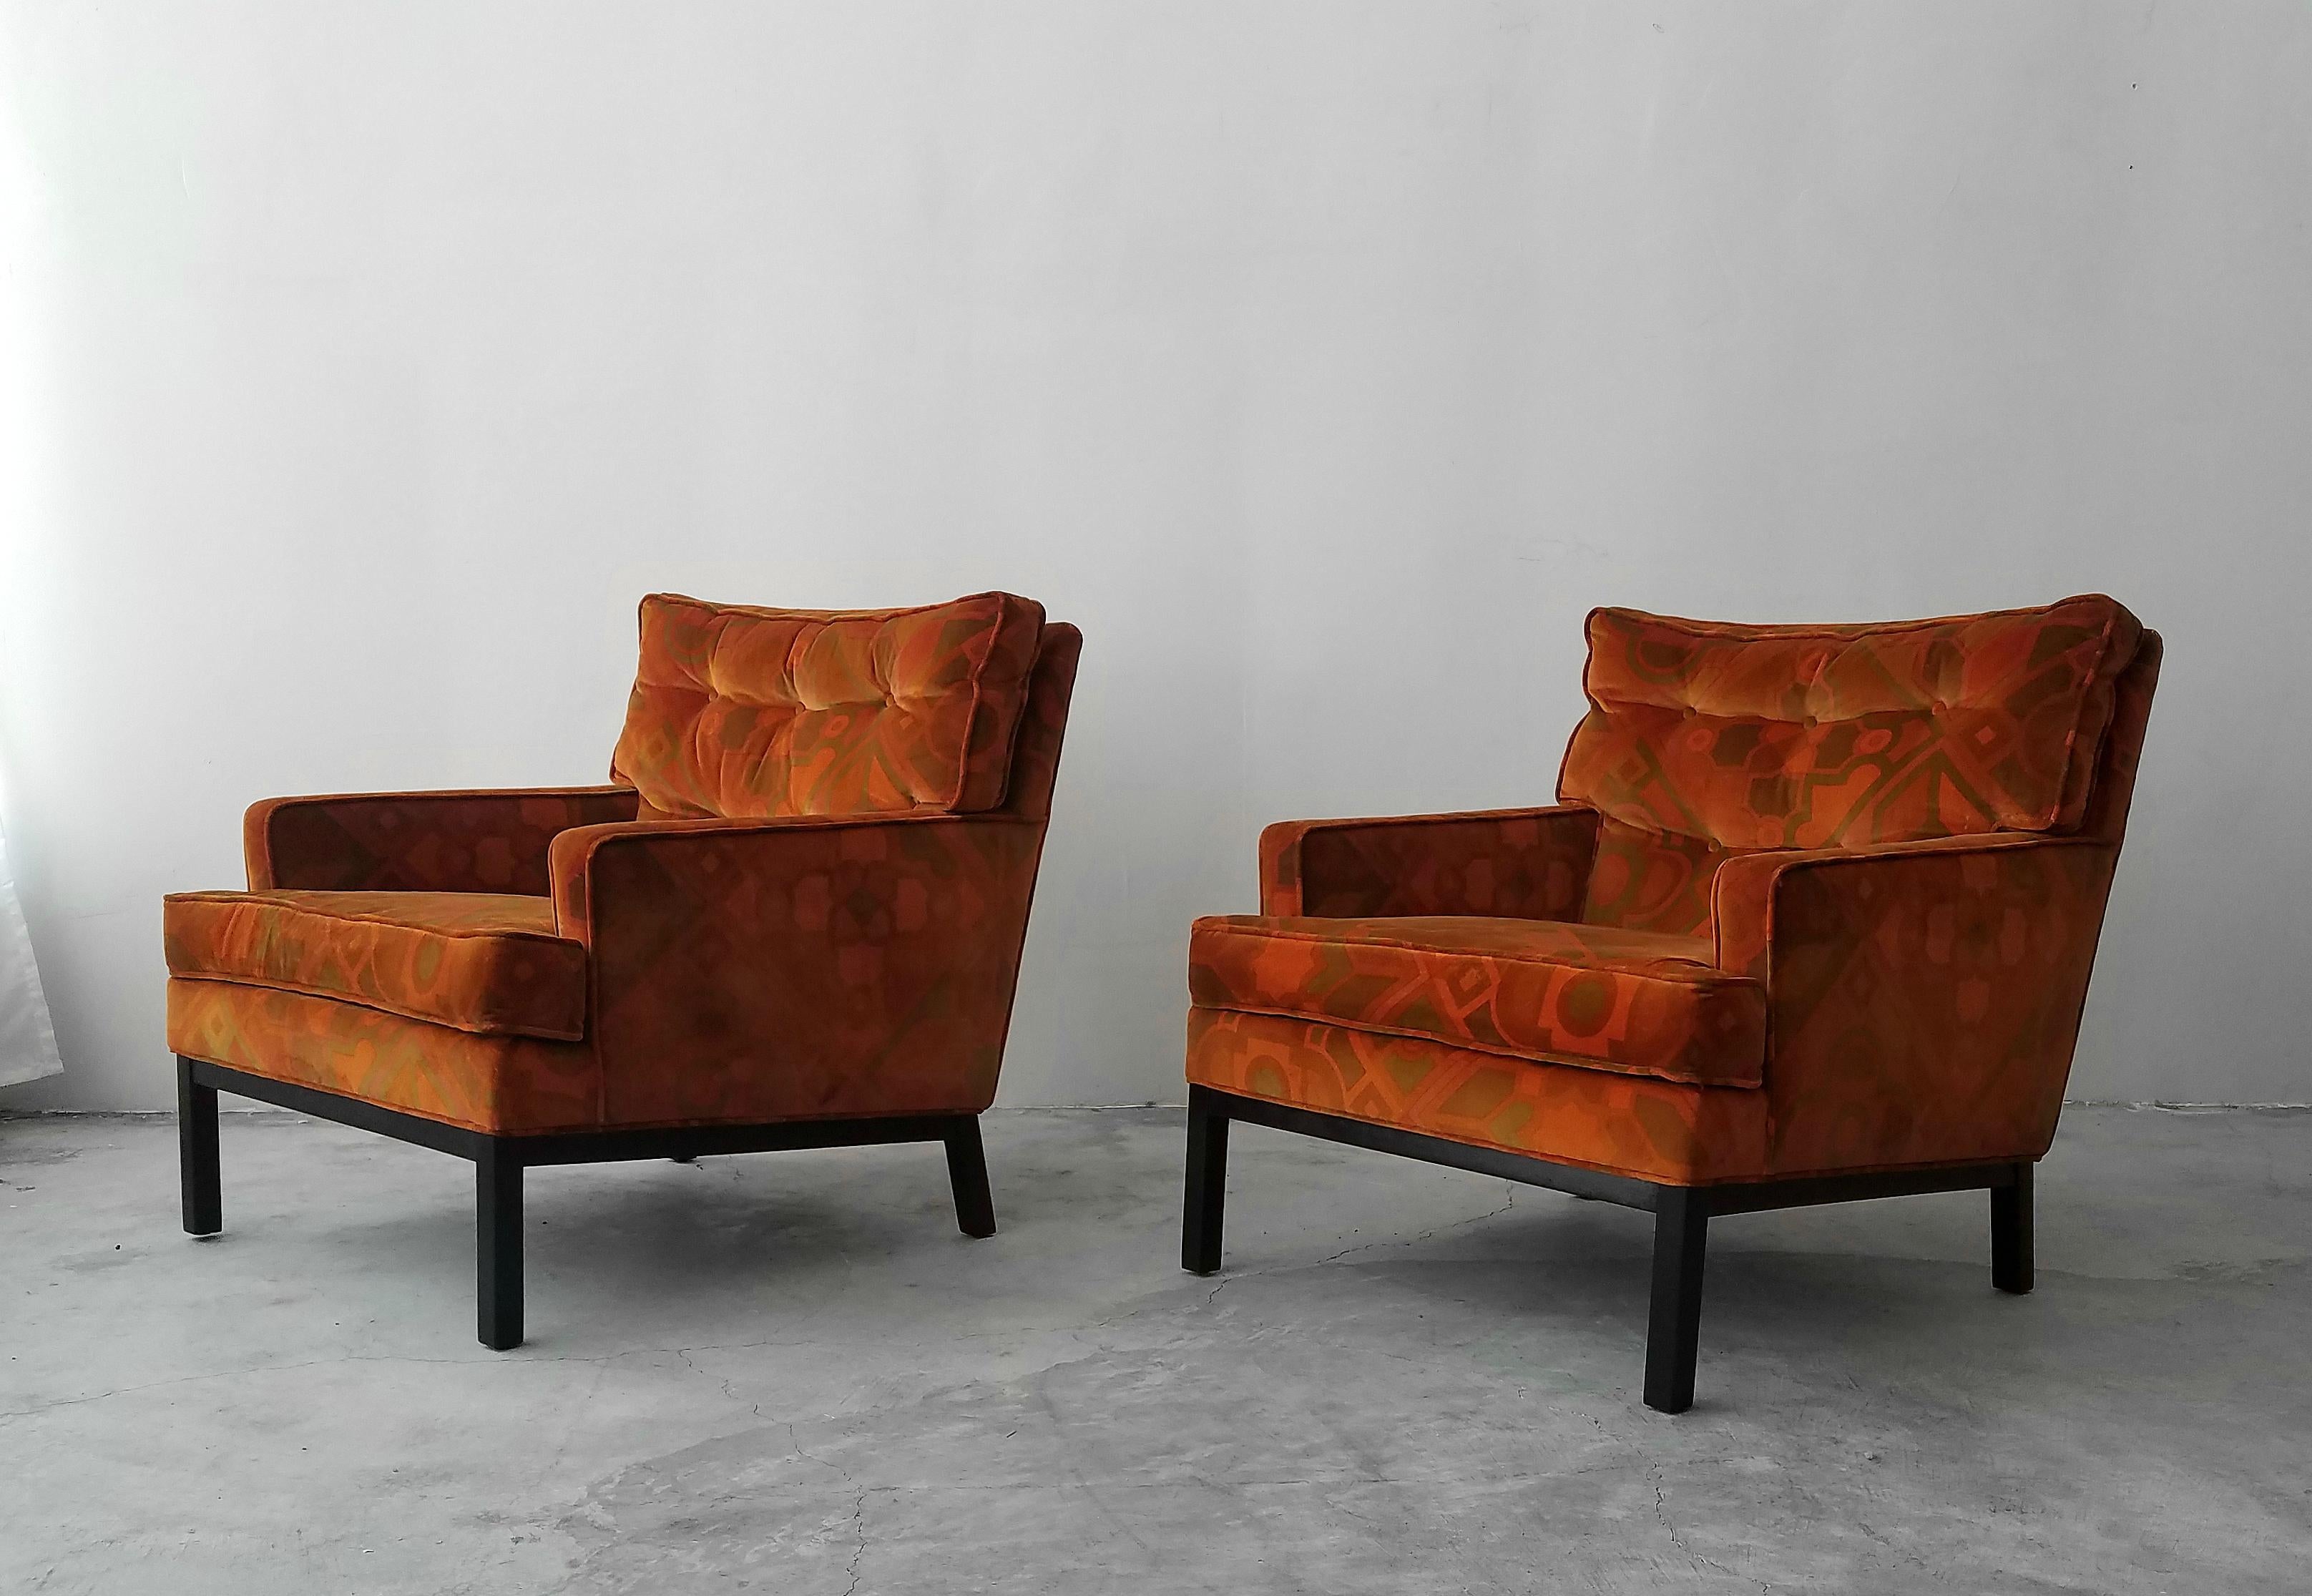 These funky Harvey Probber lounge chairs are all original in their great burnt orange Jack Lenor Larsen velvet. A rare find. Perfect for someone vamping a 1970s shag pad or a Palm Springs ranch.

Chairs, including the velvet, are in excellent